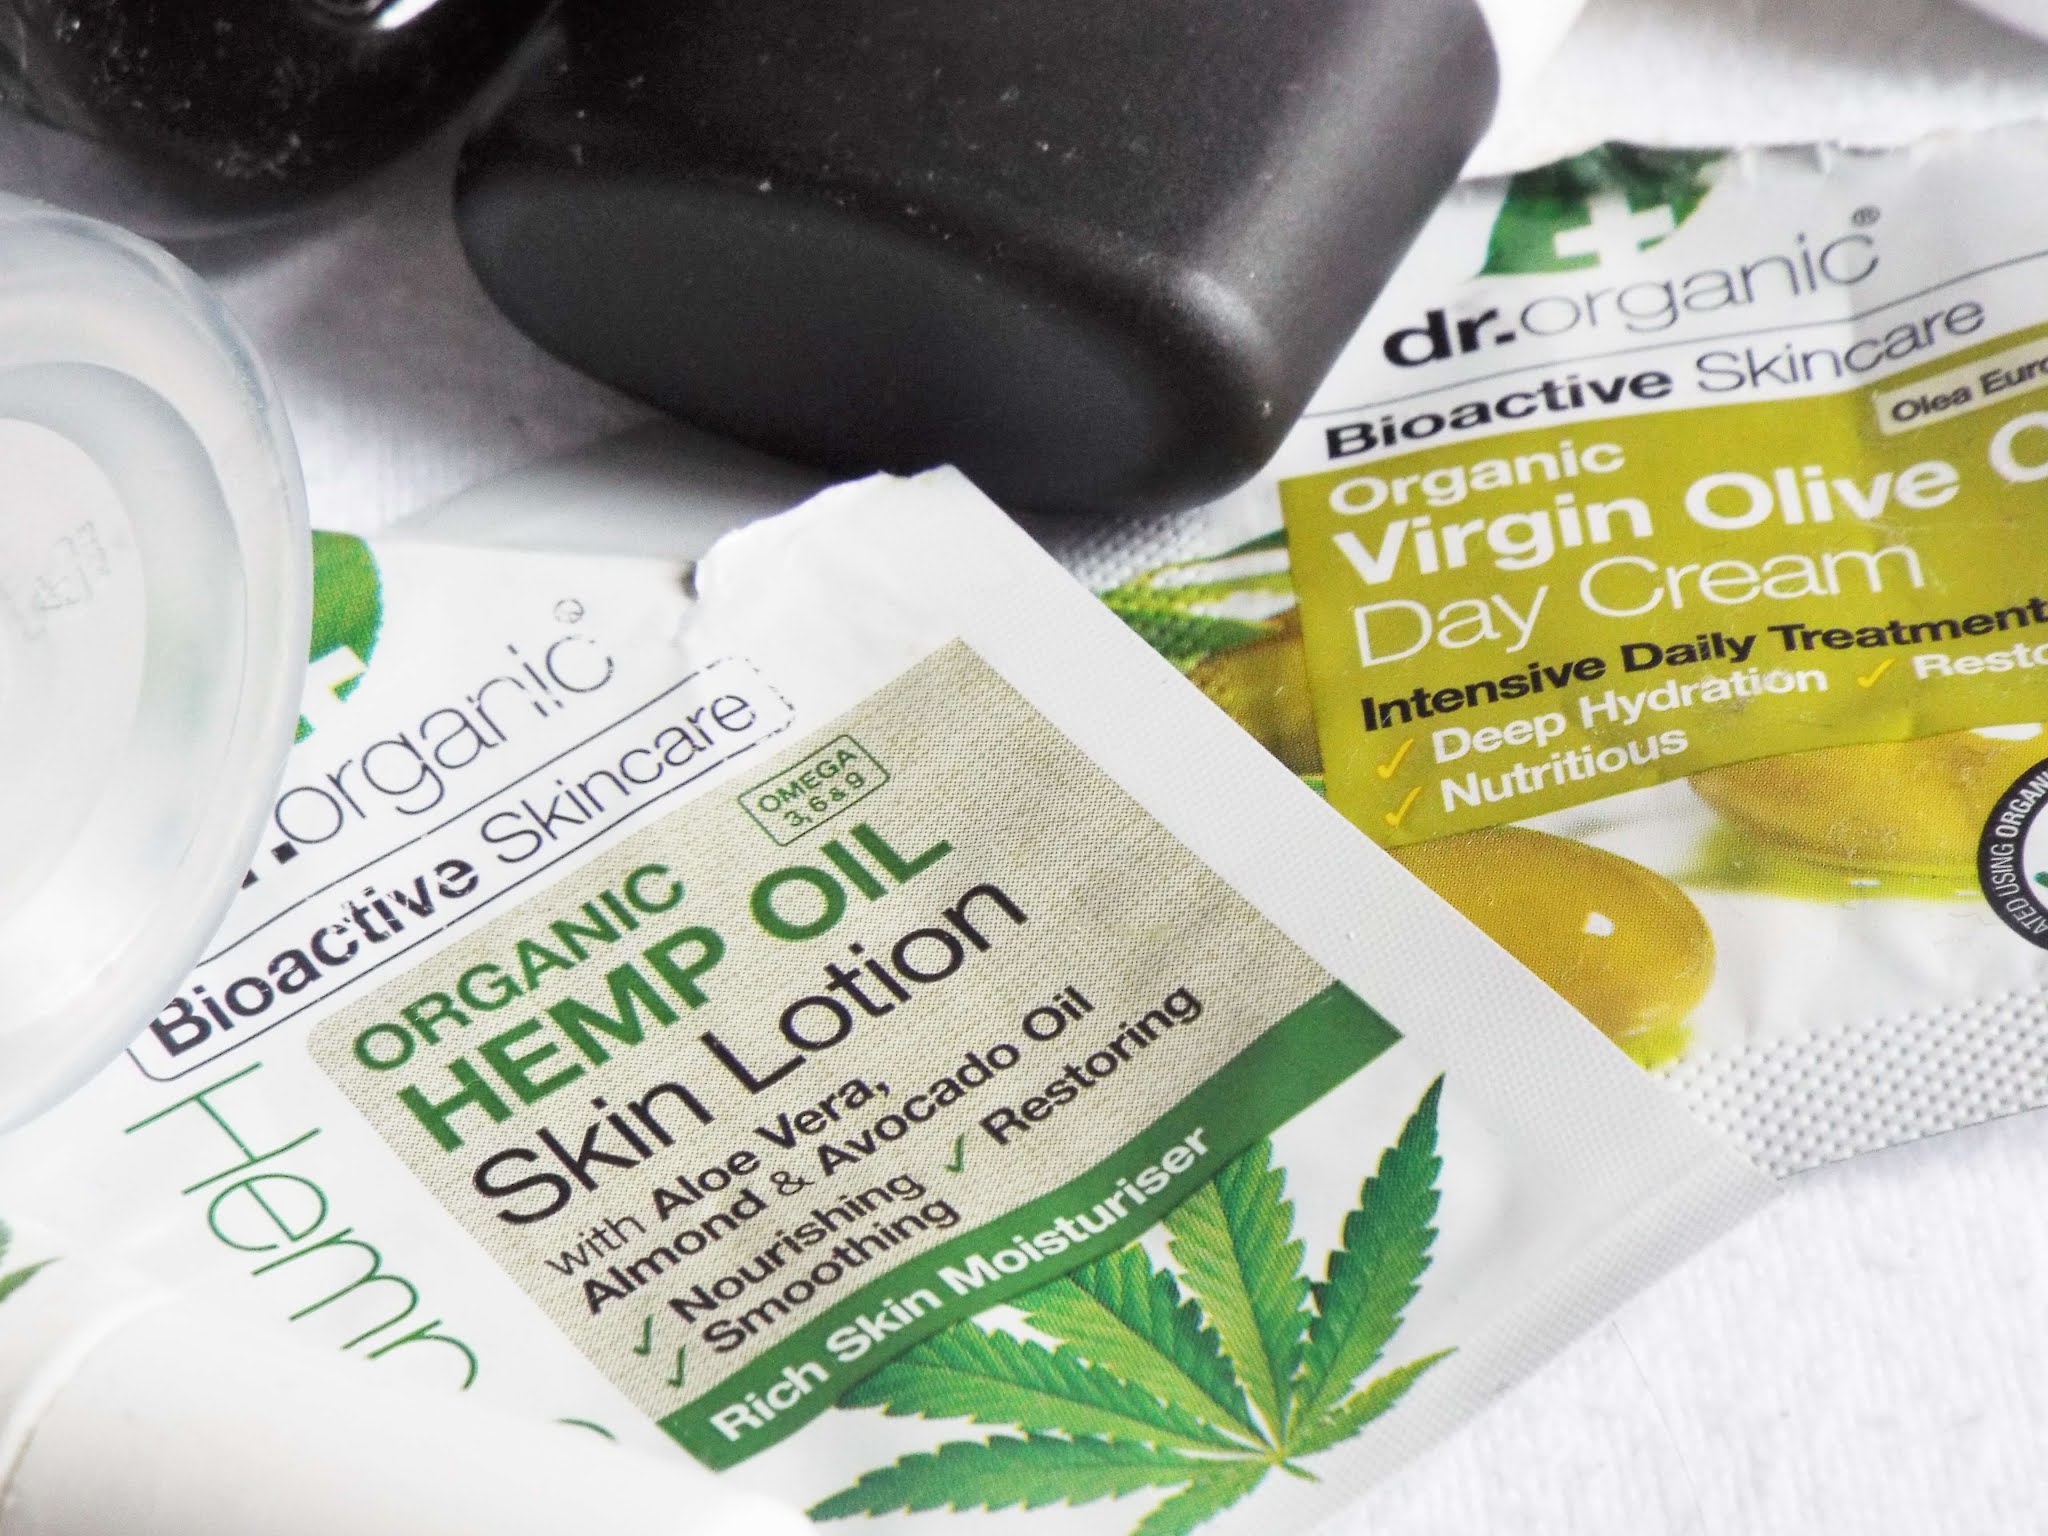 Dr Organic Hemp Oil Skin Lotion and Virgin Olive Oil Day Cream, in two sample sachets.